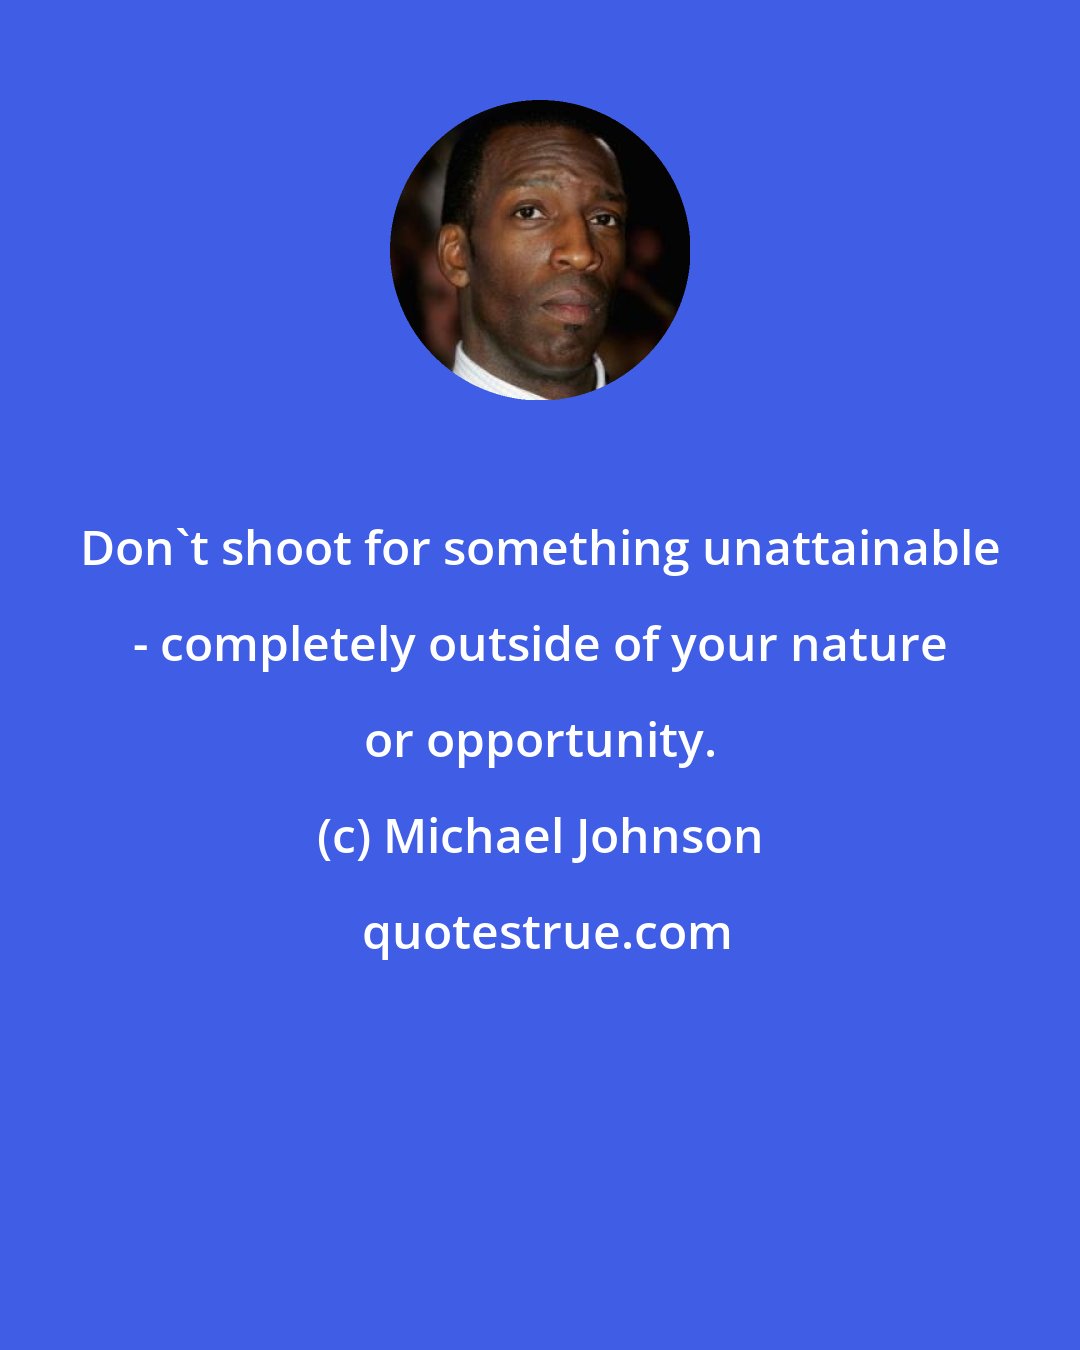 Michael Johnson: Don't shoot for something unattainable - completely outside of your nature or opportunity.